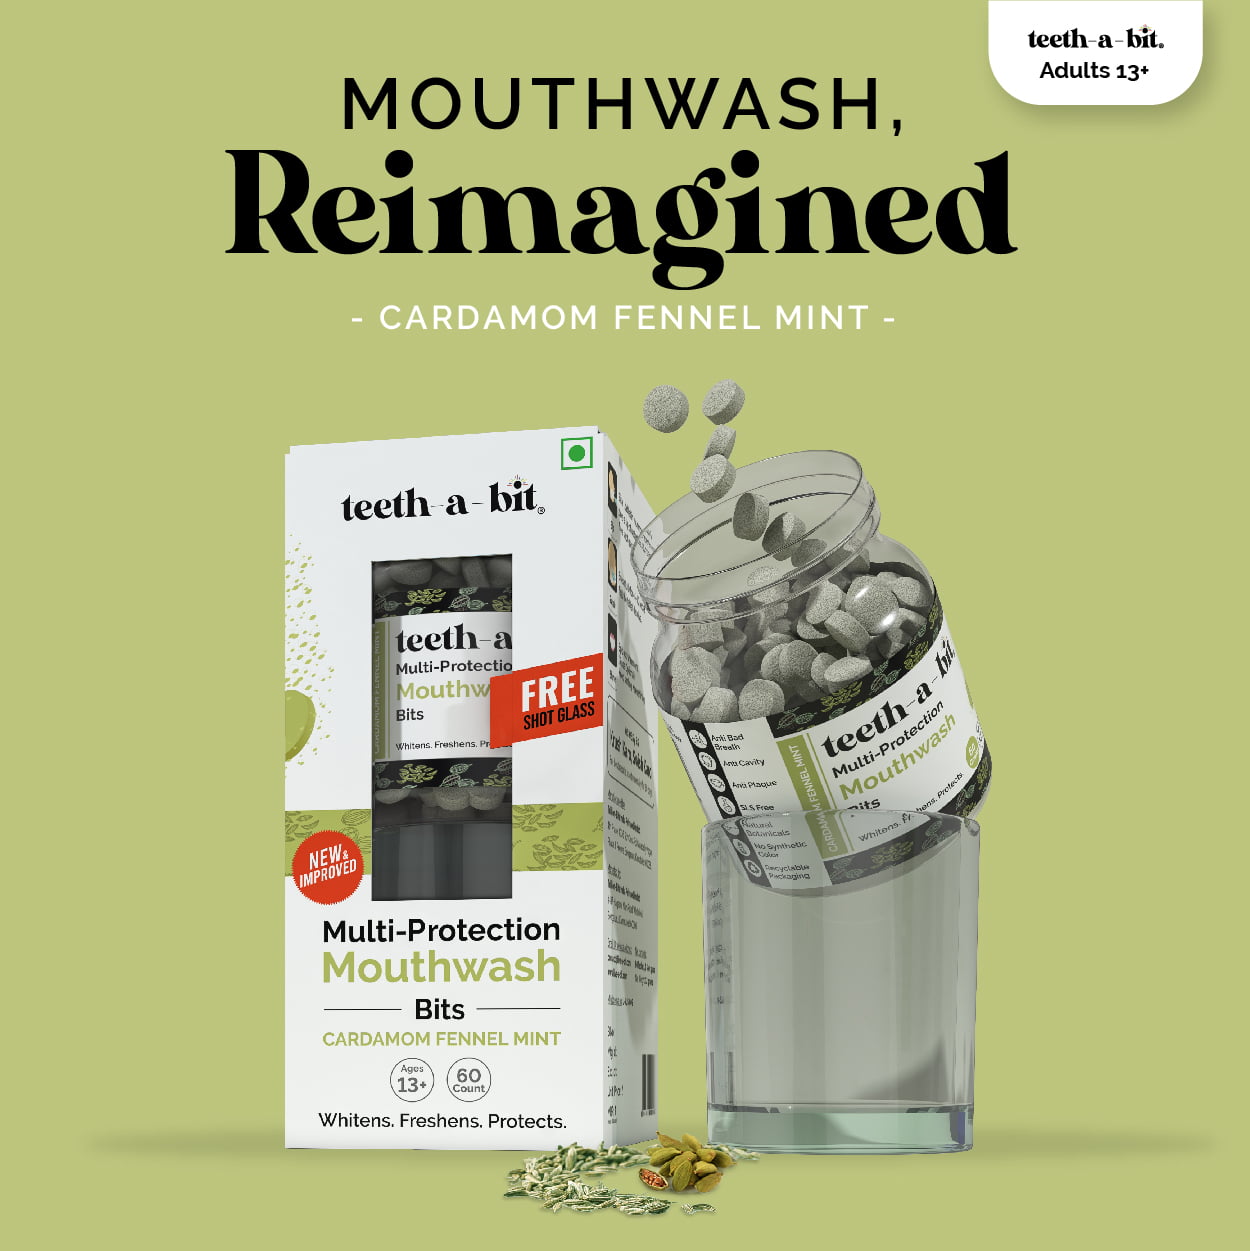 teeth-a-bit Multiprotection Cardamom Fennel Mint Mouthwash Bits |Equal to 1200ml of liquid mouthwash (60 Count)